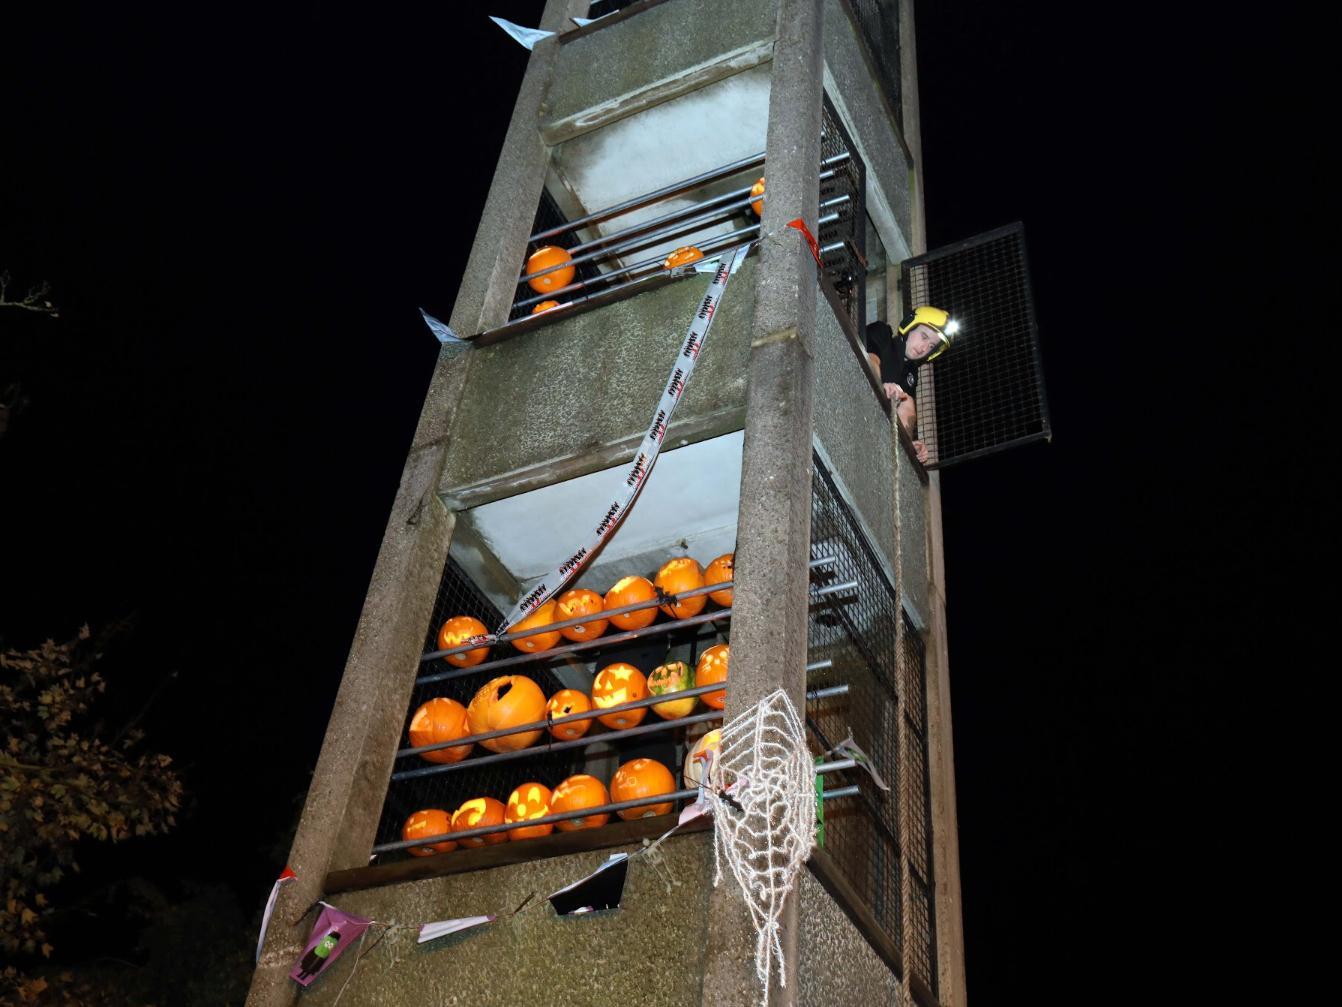 The pumpkins were brought to the station between 5pm and 8pm.